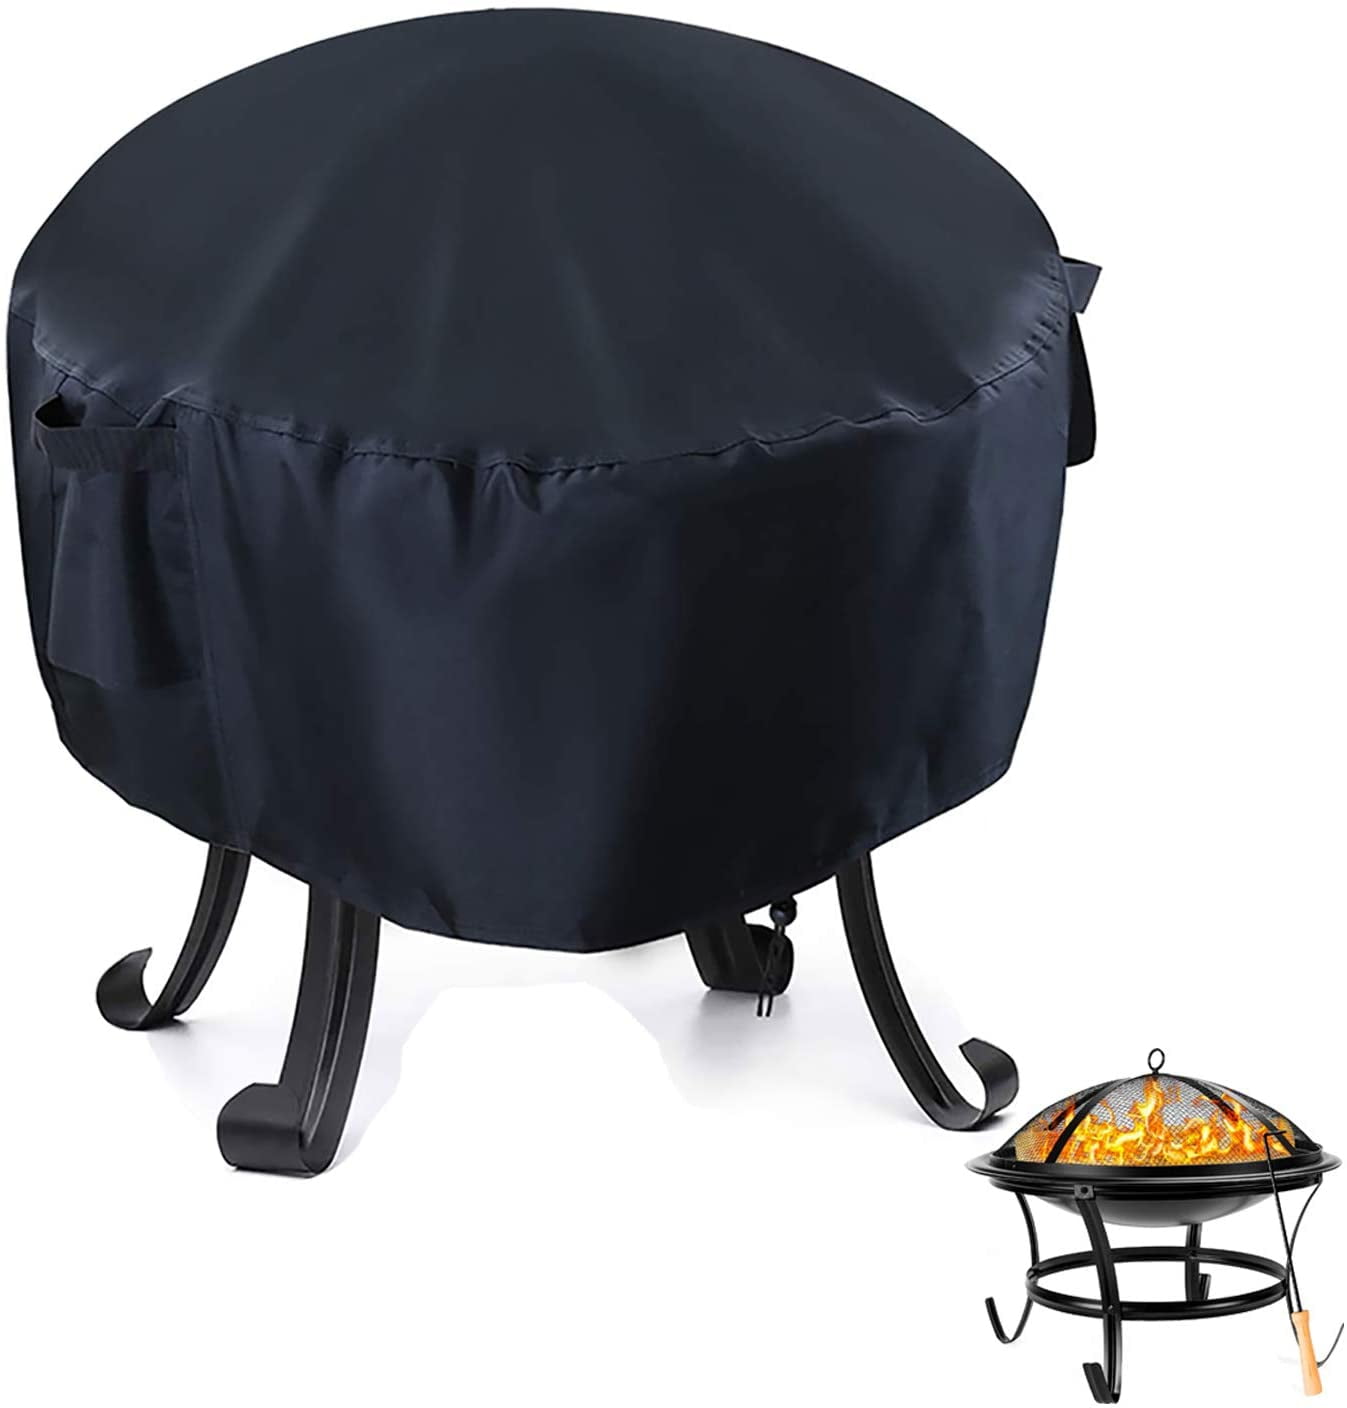 44" Square Gas Fire Pit Cover 210D Fabric Coating Patio Durable Outdoor Cover